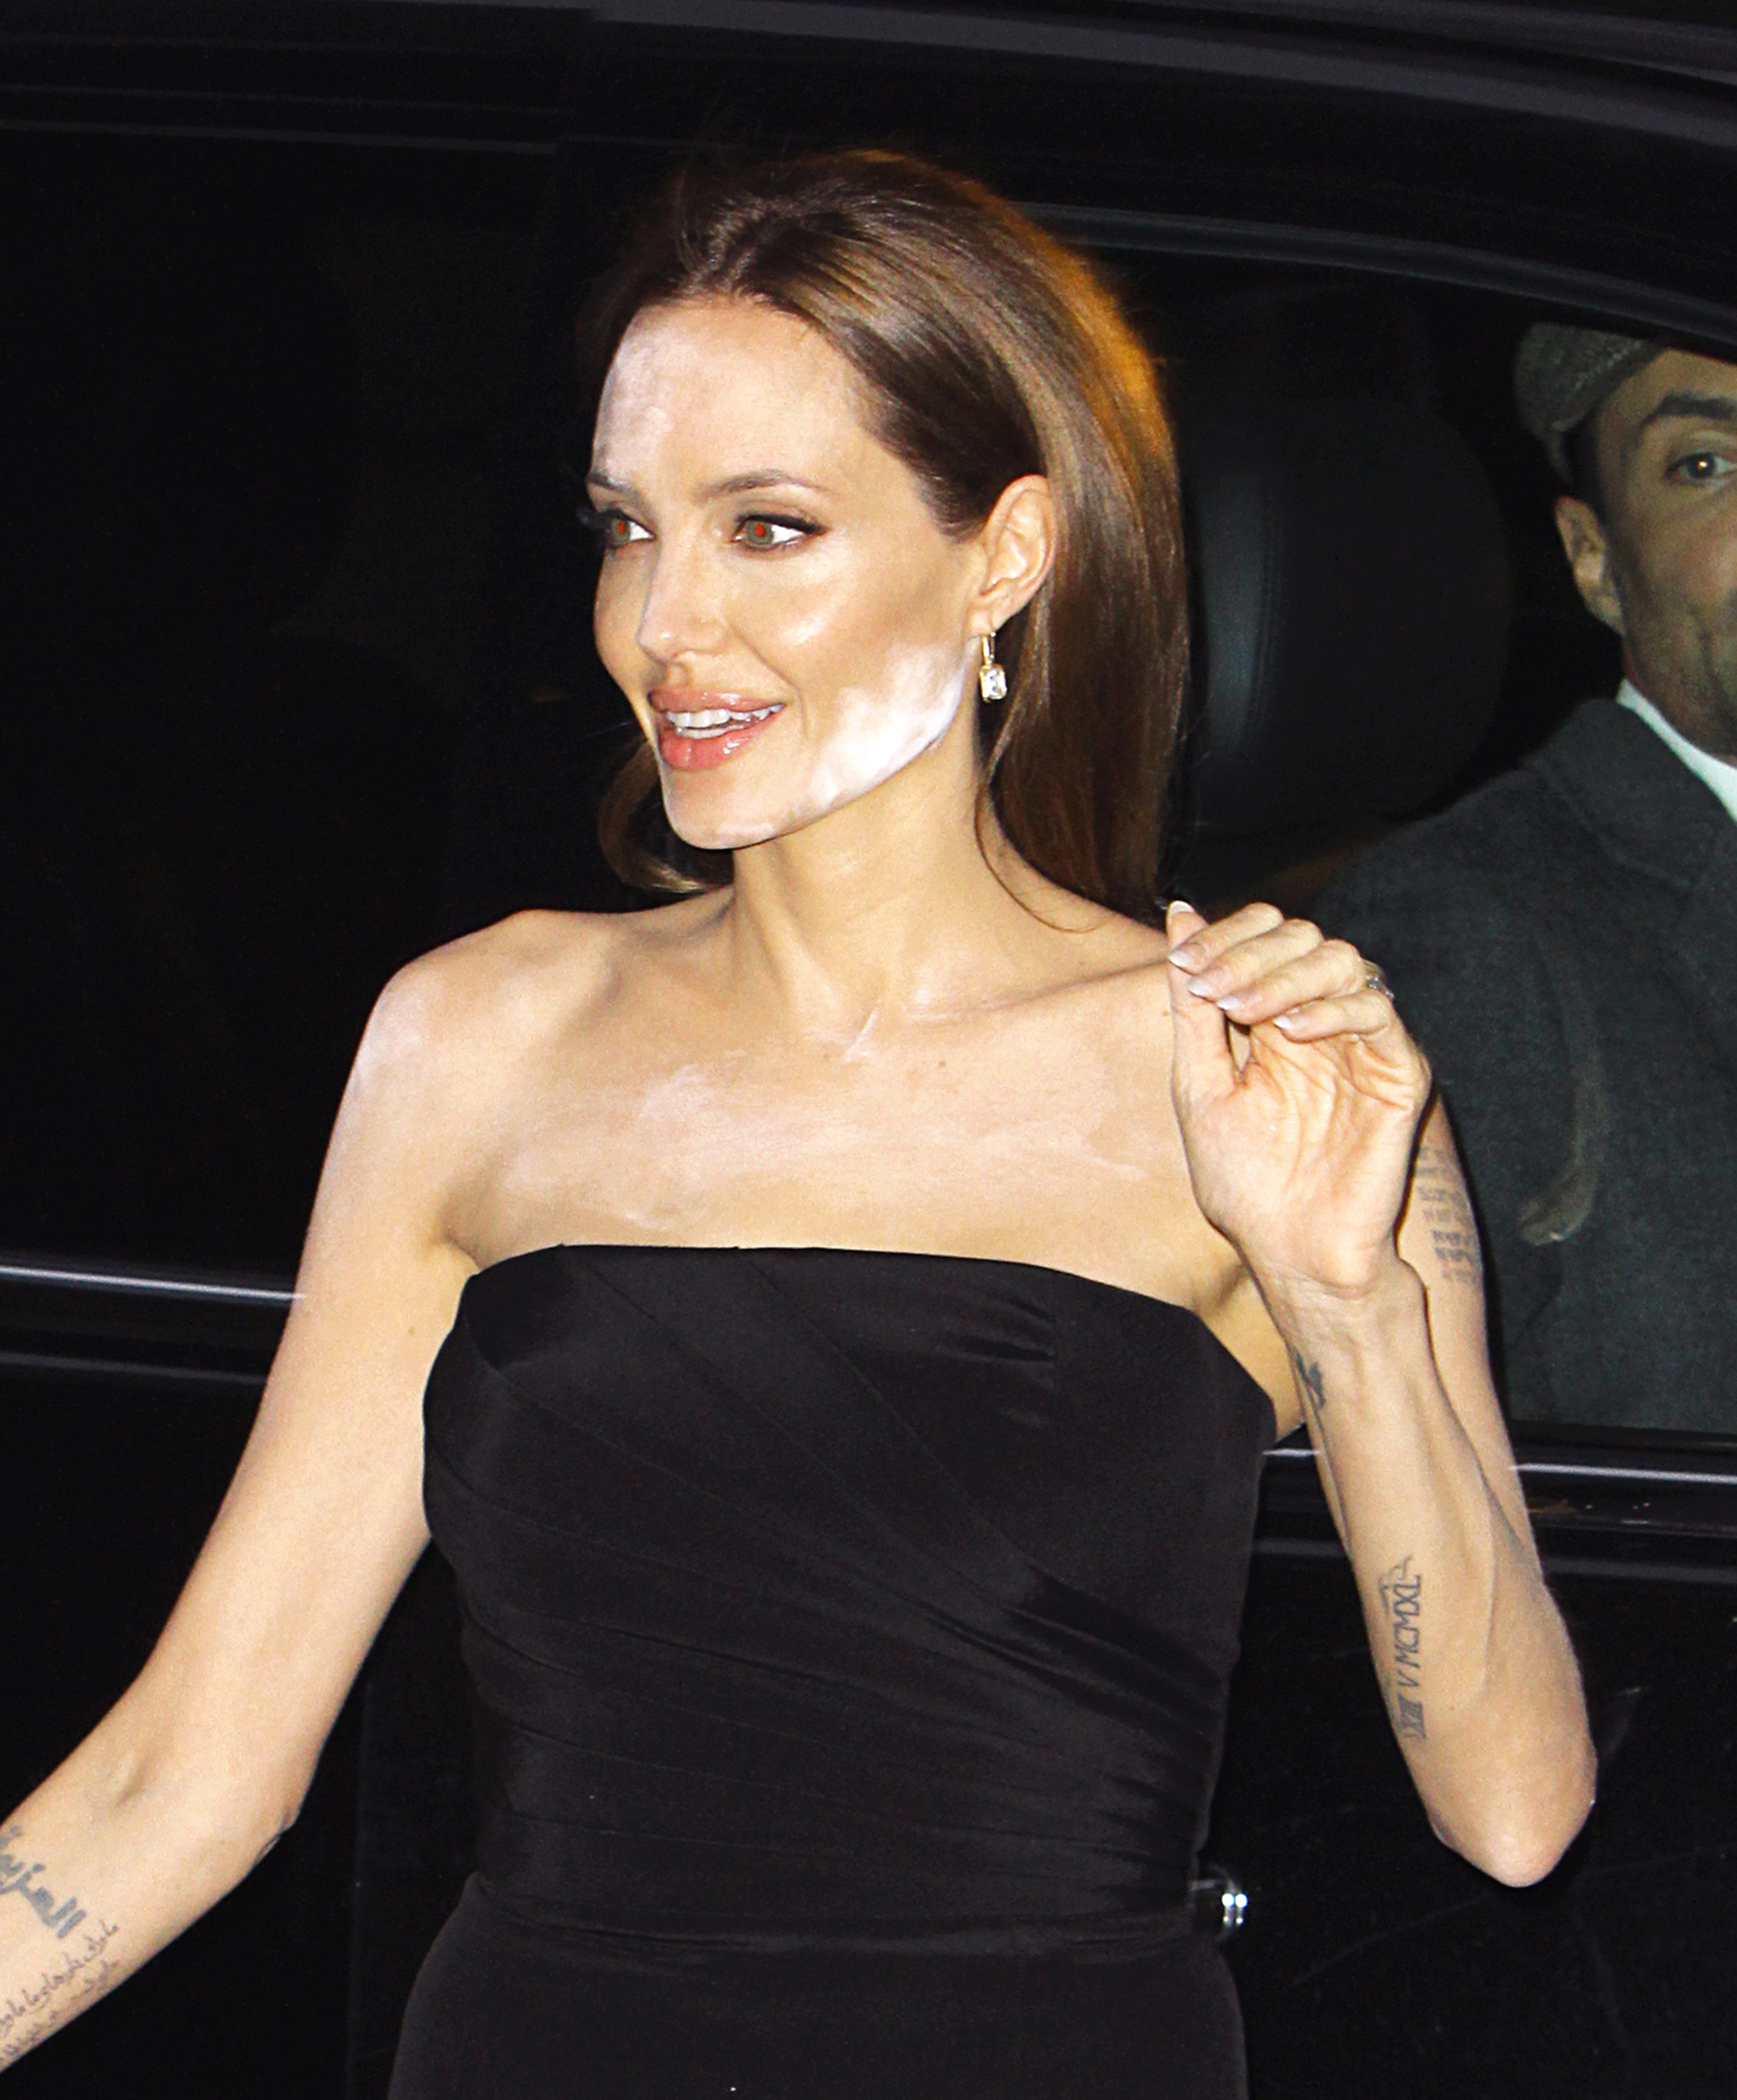 Angelina Jolie suffers a white powdered makeup malfunction while attending a screening for HBO's "The Normal Heart" with partner Brad Pitt in NYC.